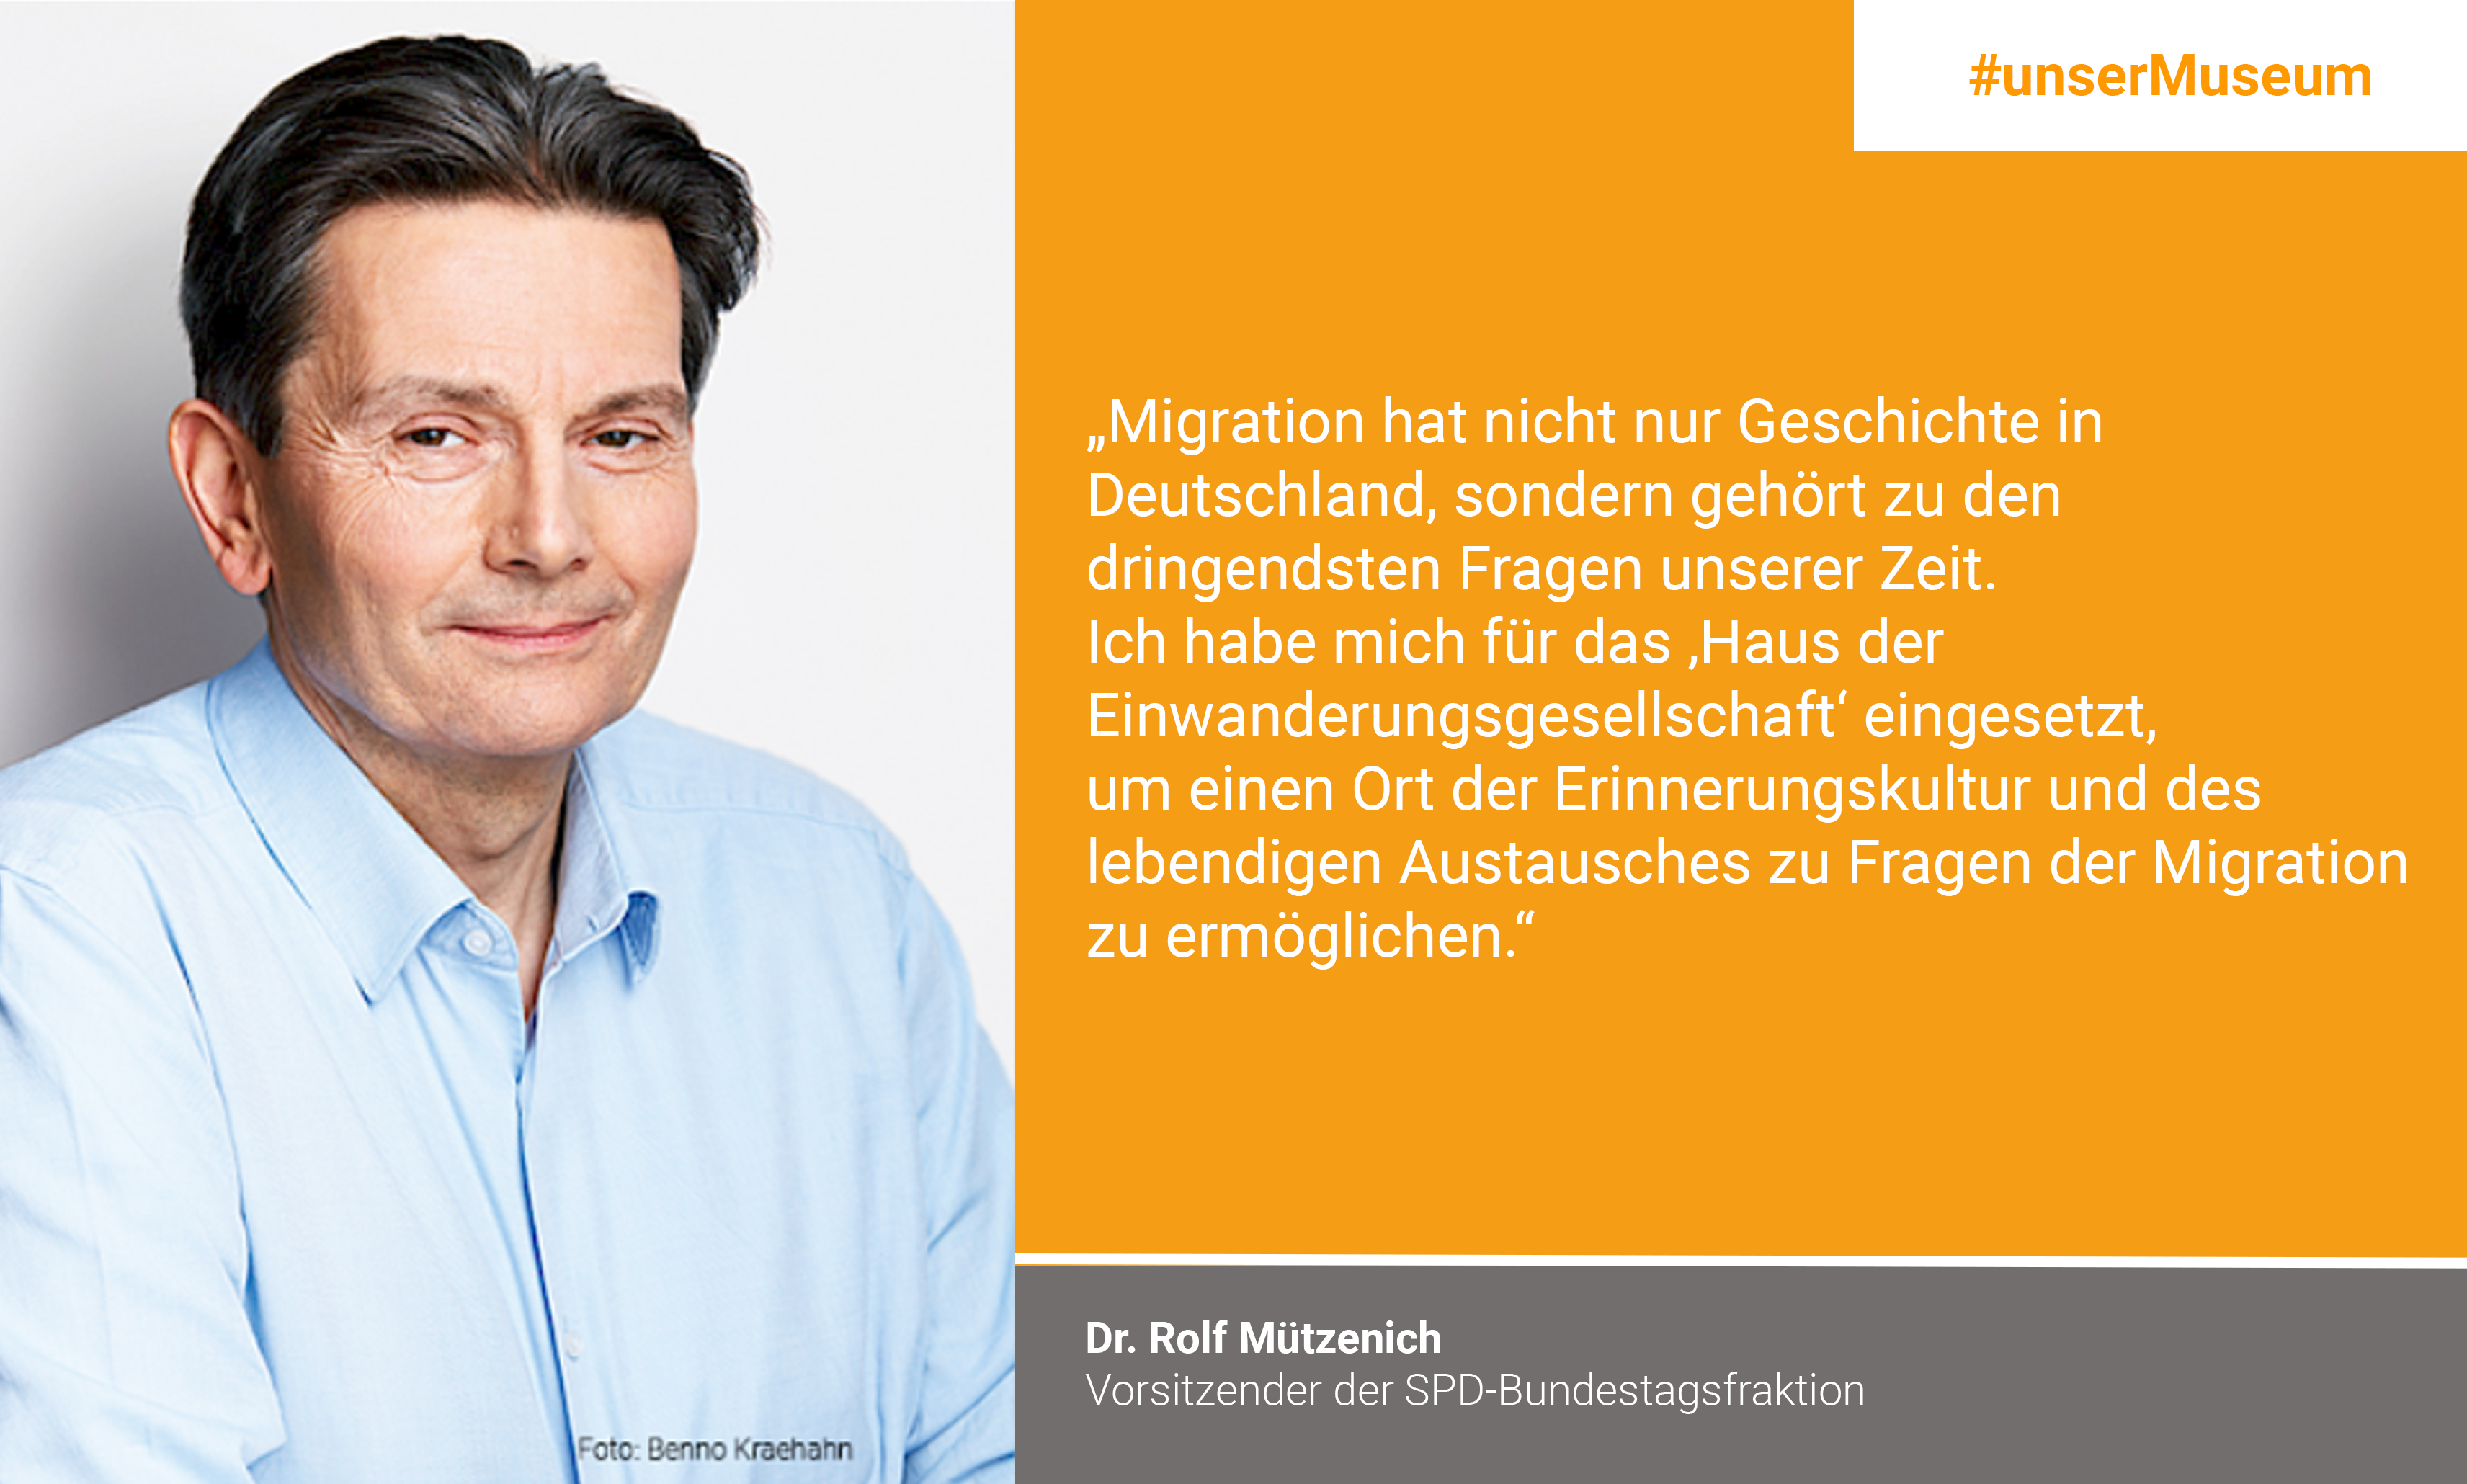 Dr. Rolf Mützenich, Chair of SPD group in the German Parliament: "Not only does migration have history in Germany, it is one of the pressing issues of our time. I campaigned for this project in order to enable a place of remembrance for culture and foster an exchange on migration issues."